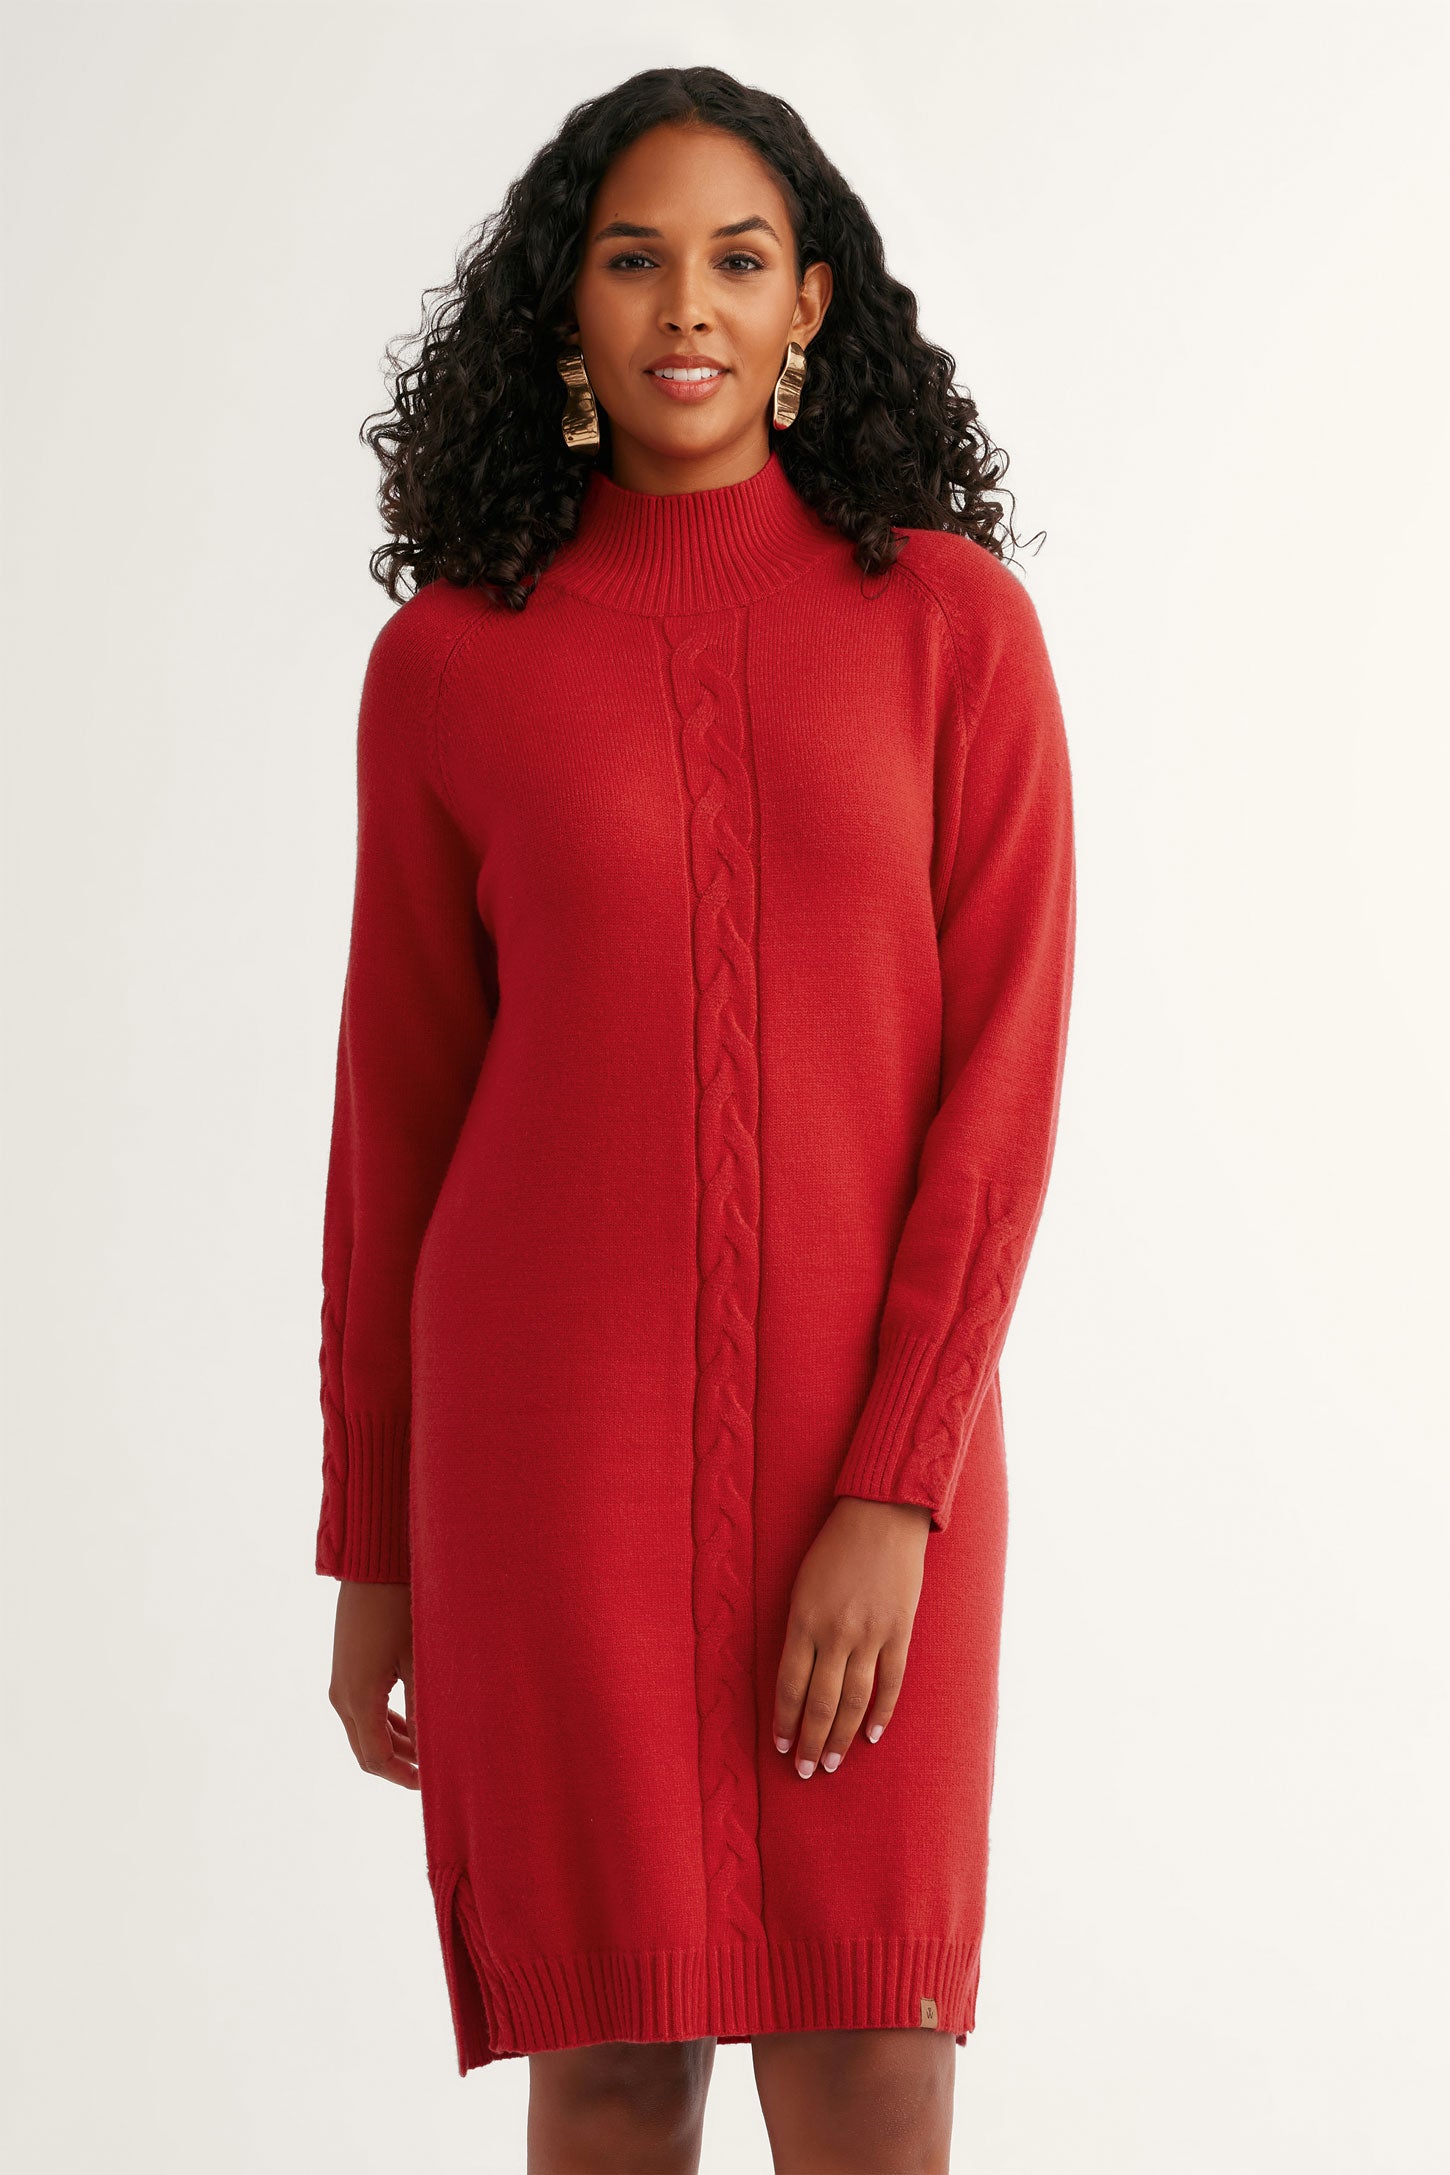 Red Cable Knit Dress